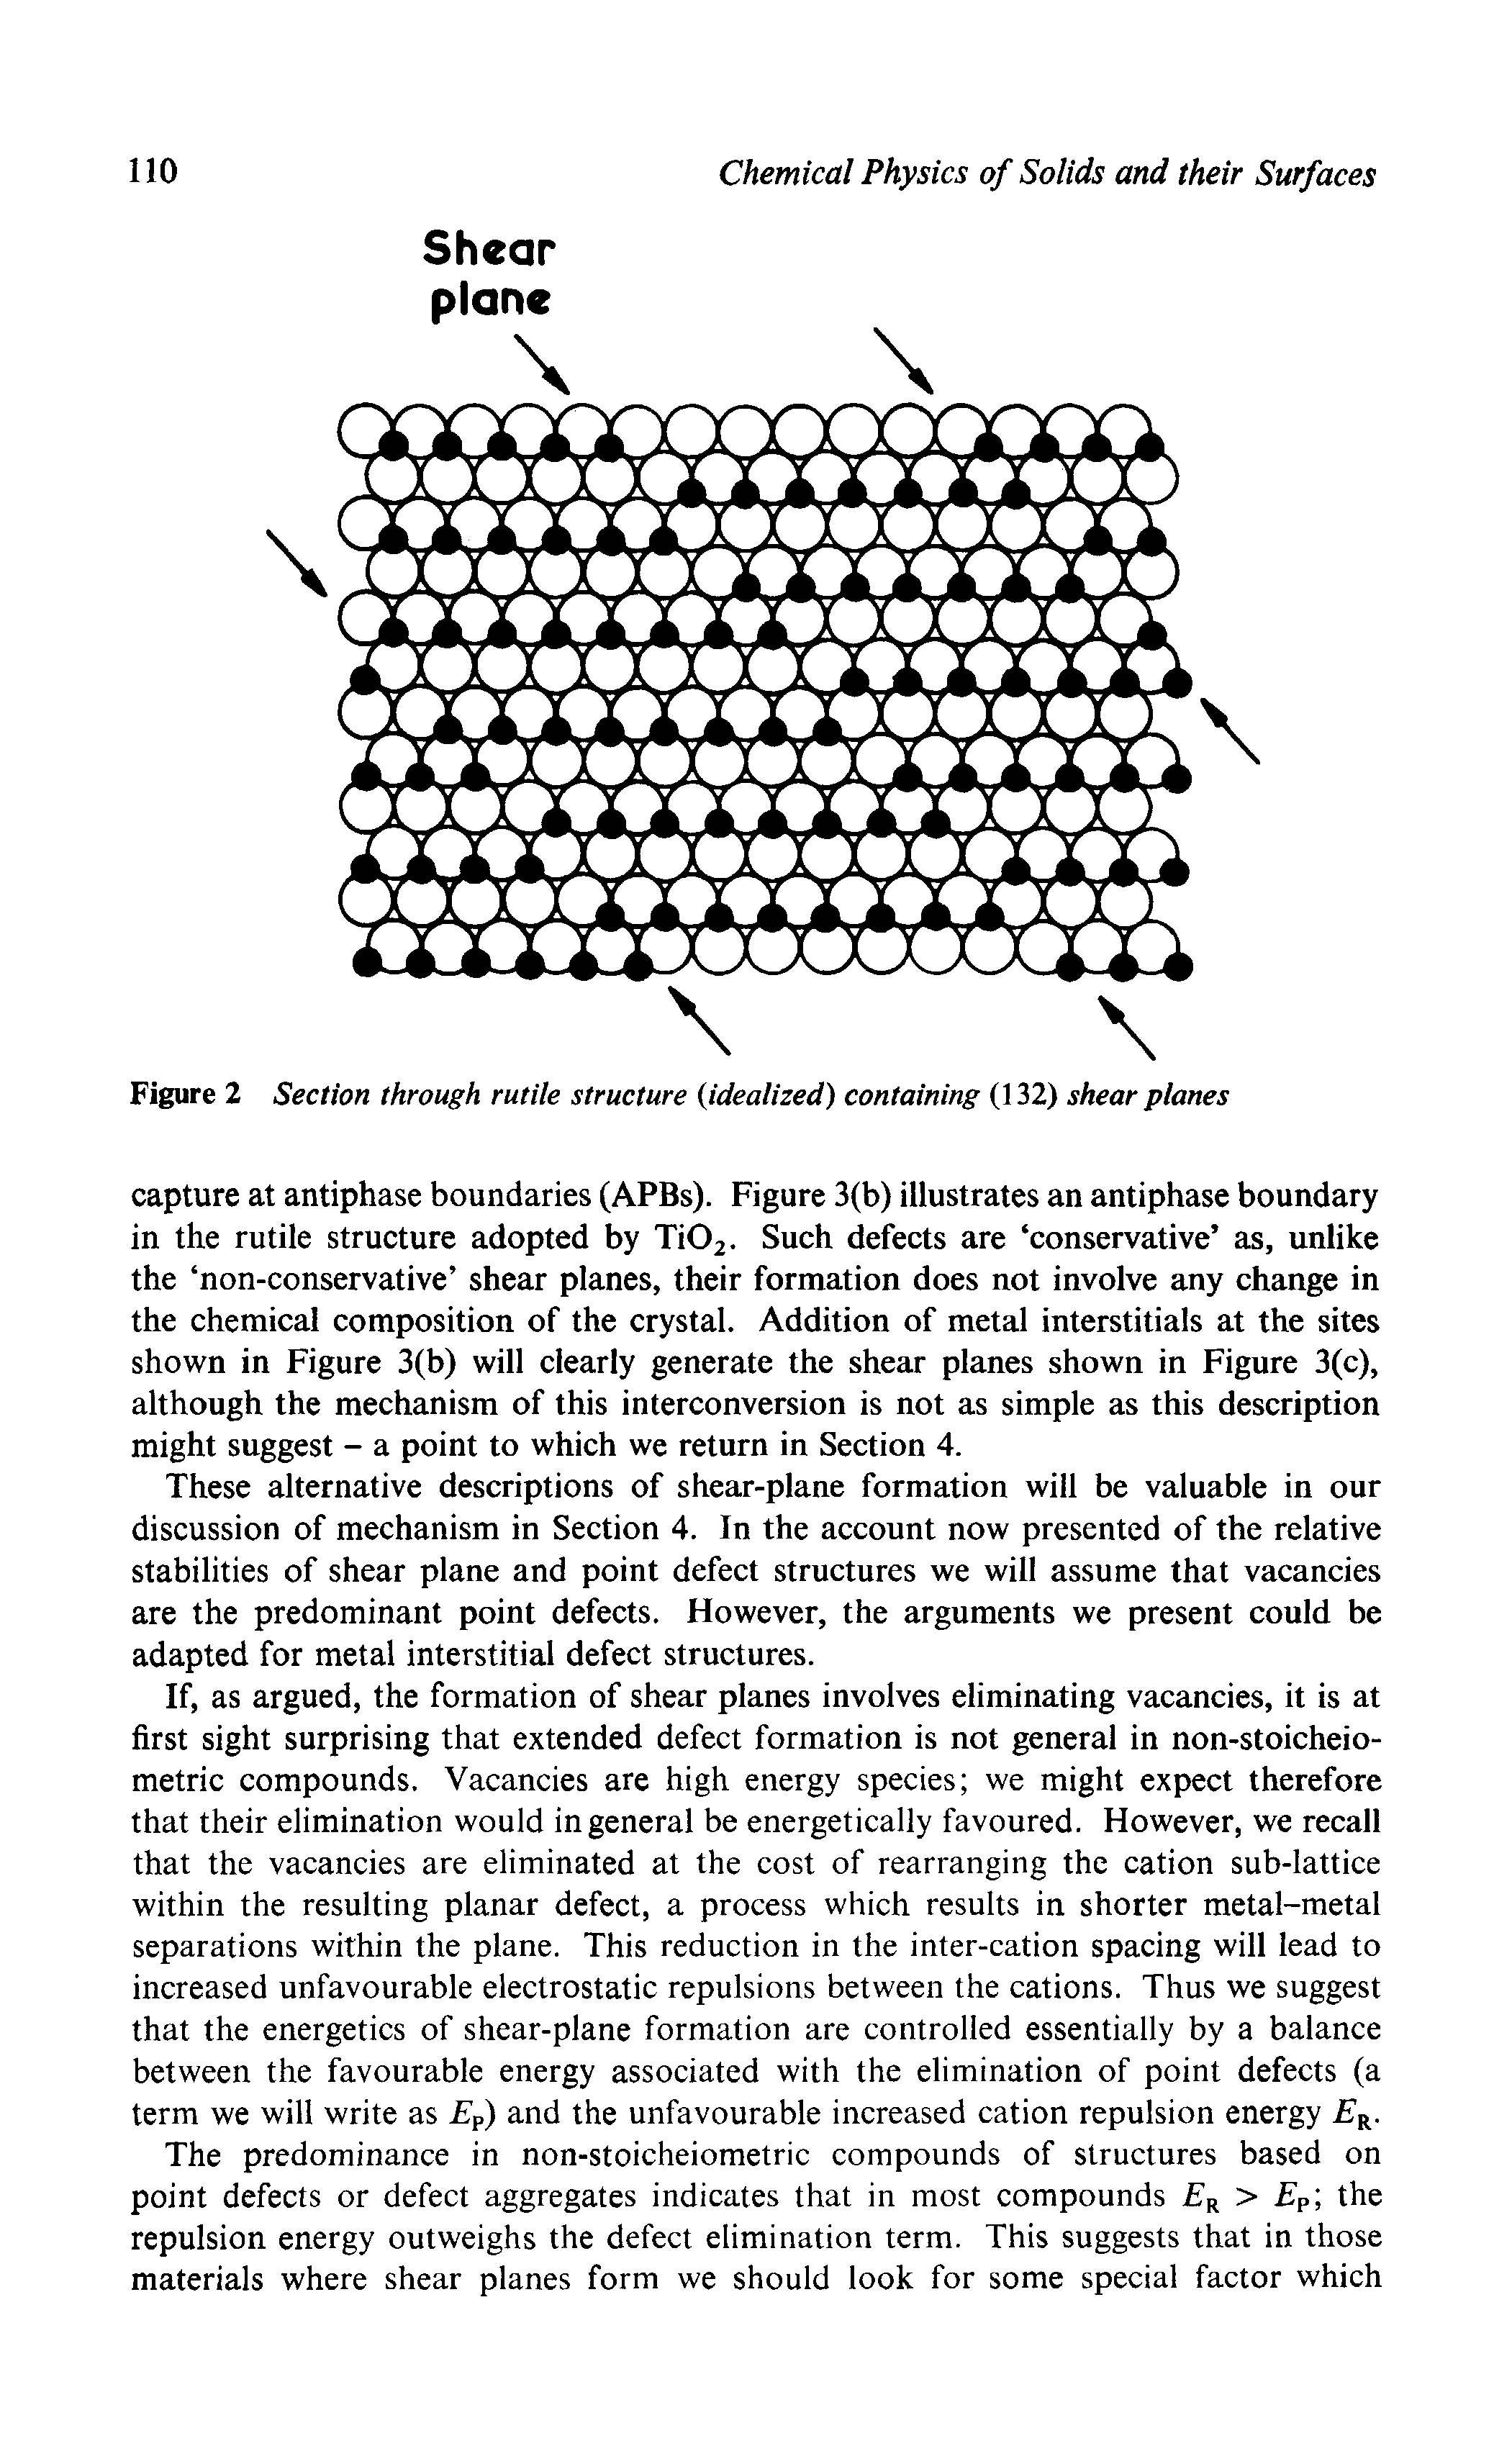 Figure 2 Section through rutile structure idealized) containing (132) shear planes...